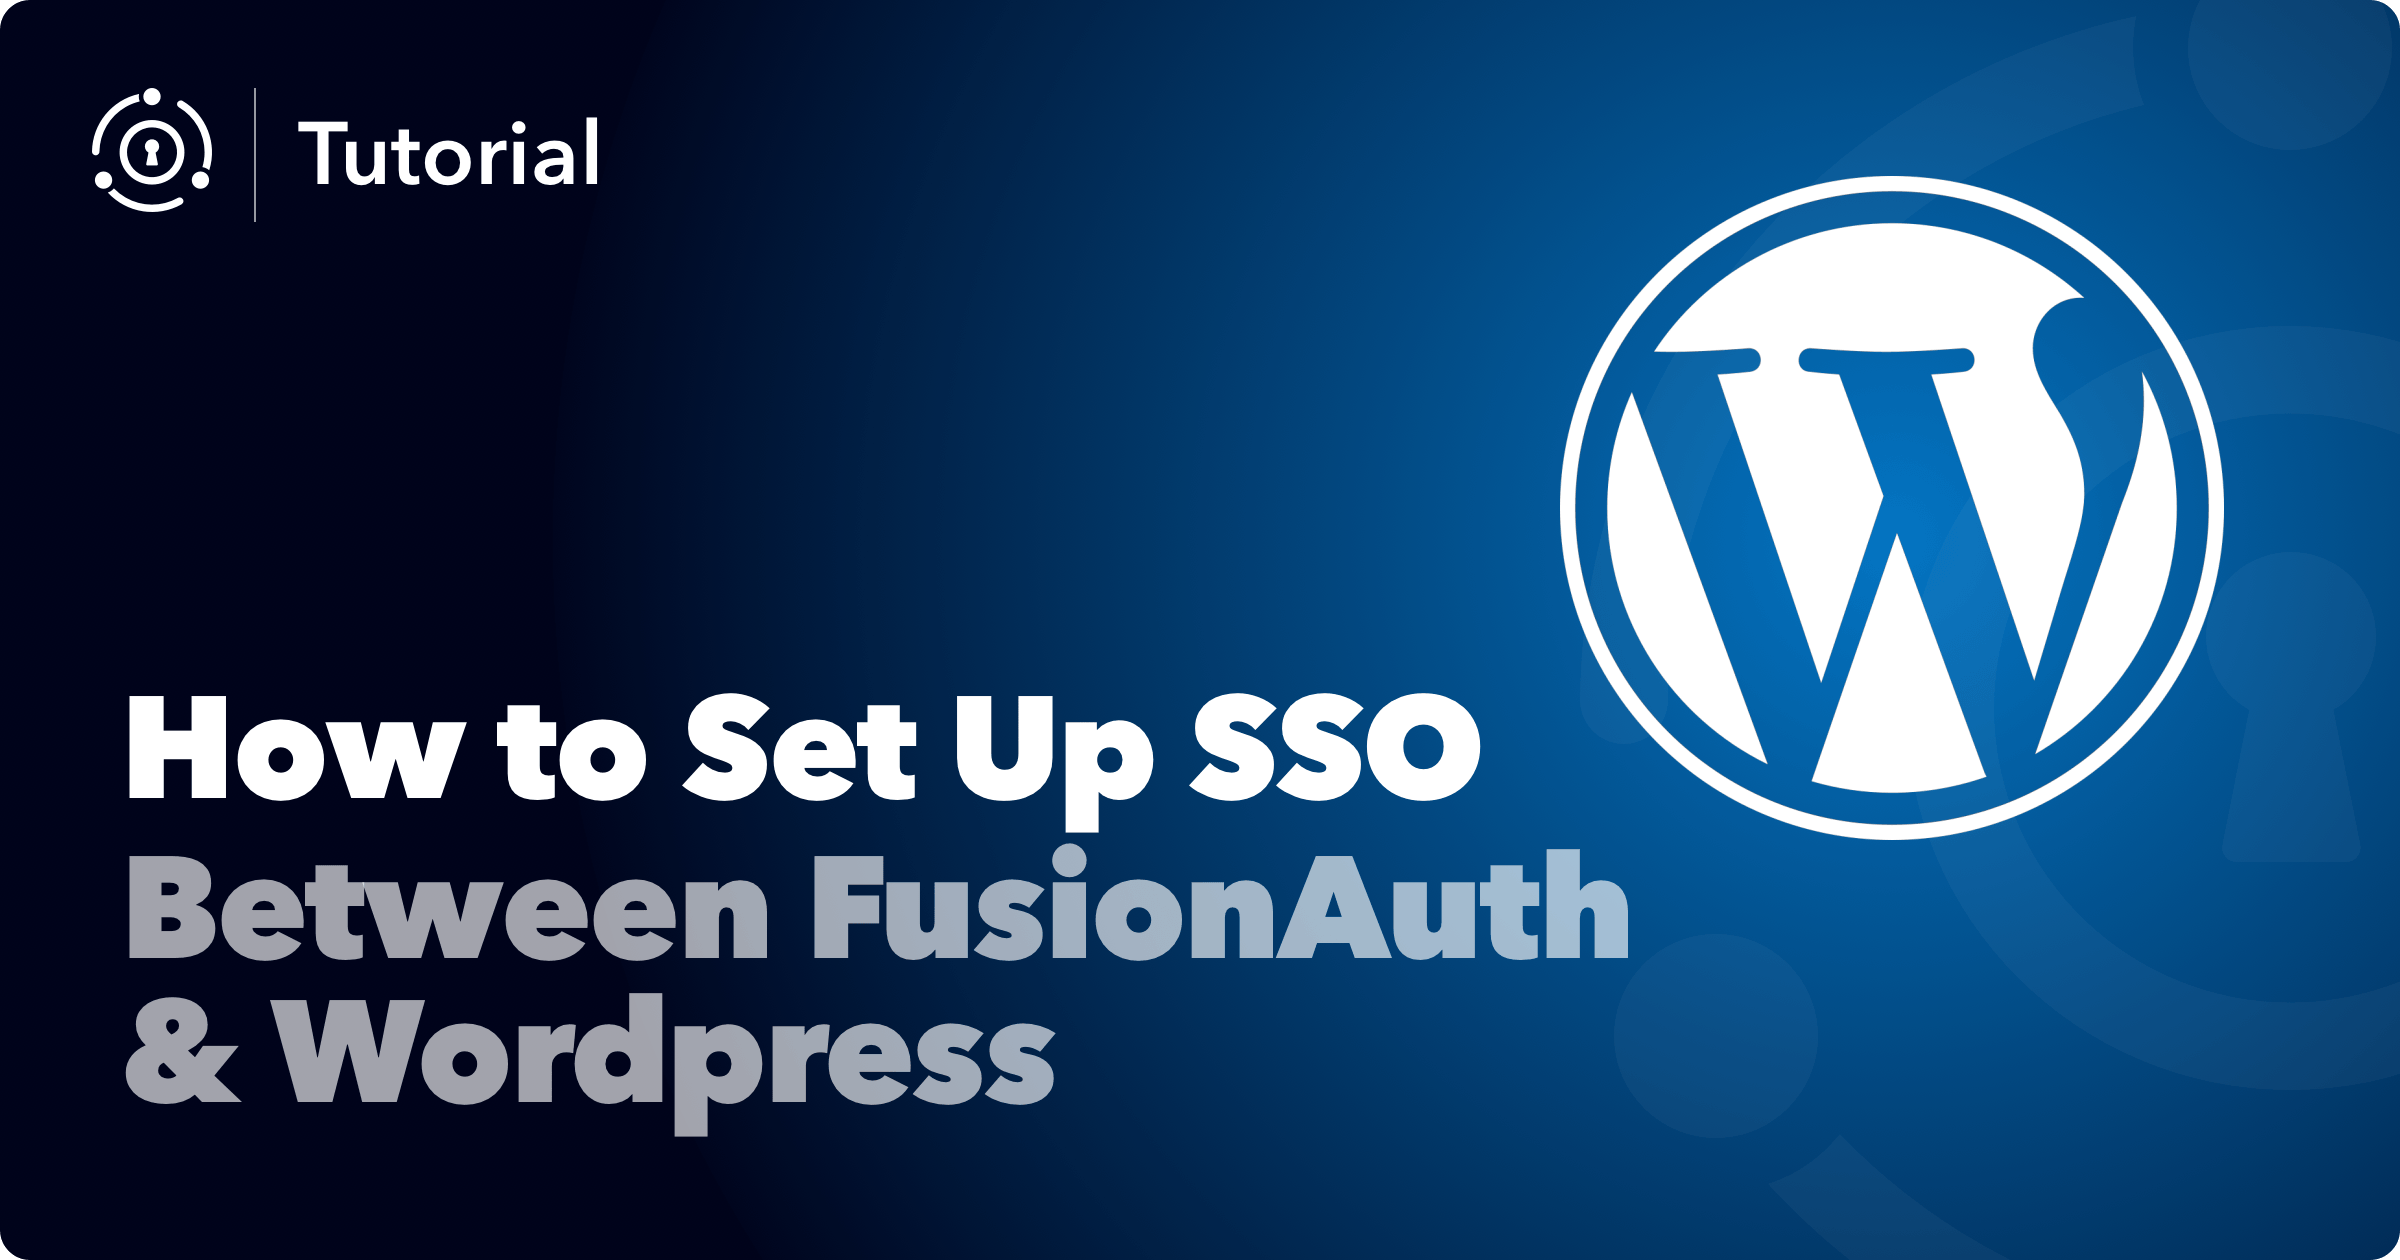 How to Set Up Single Sign-On Between FusionAuth and WordPress